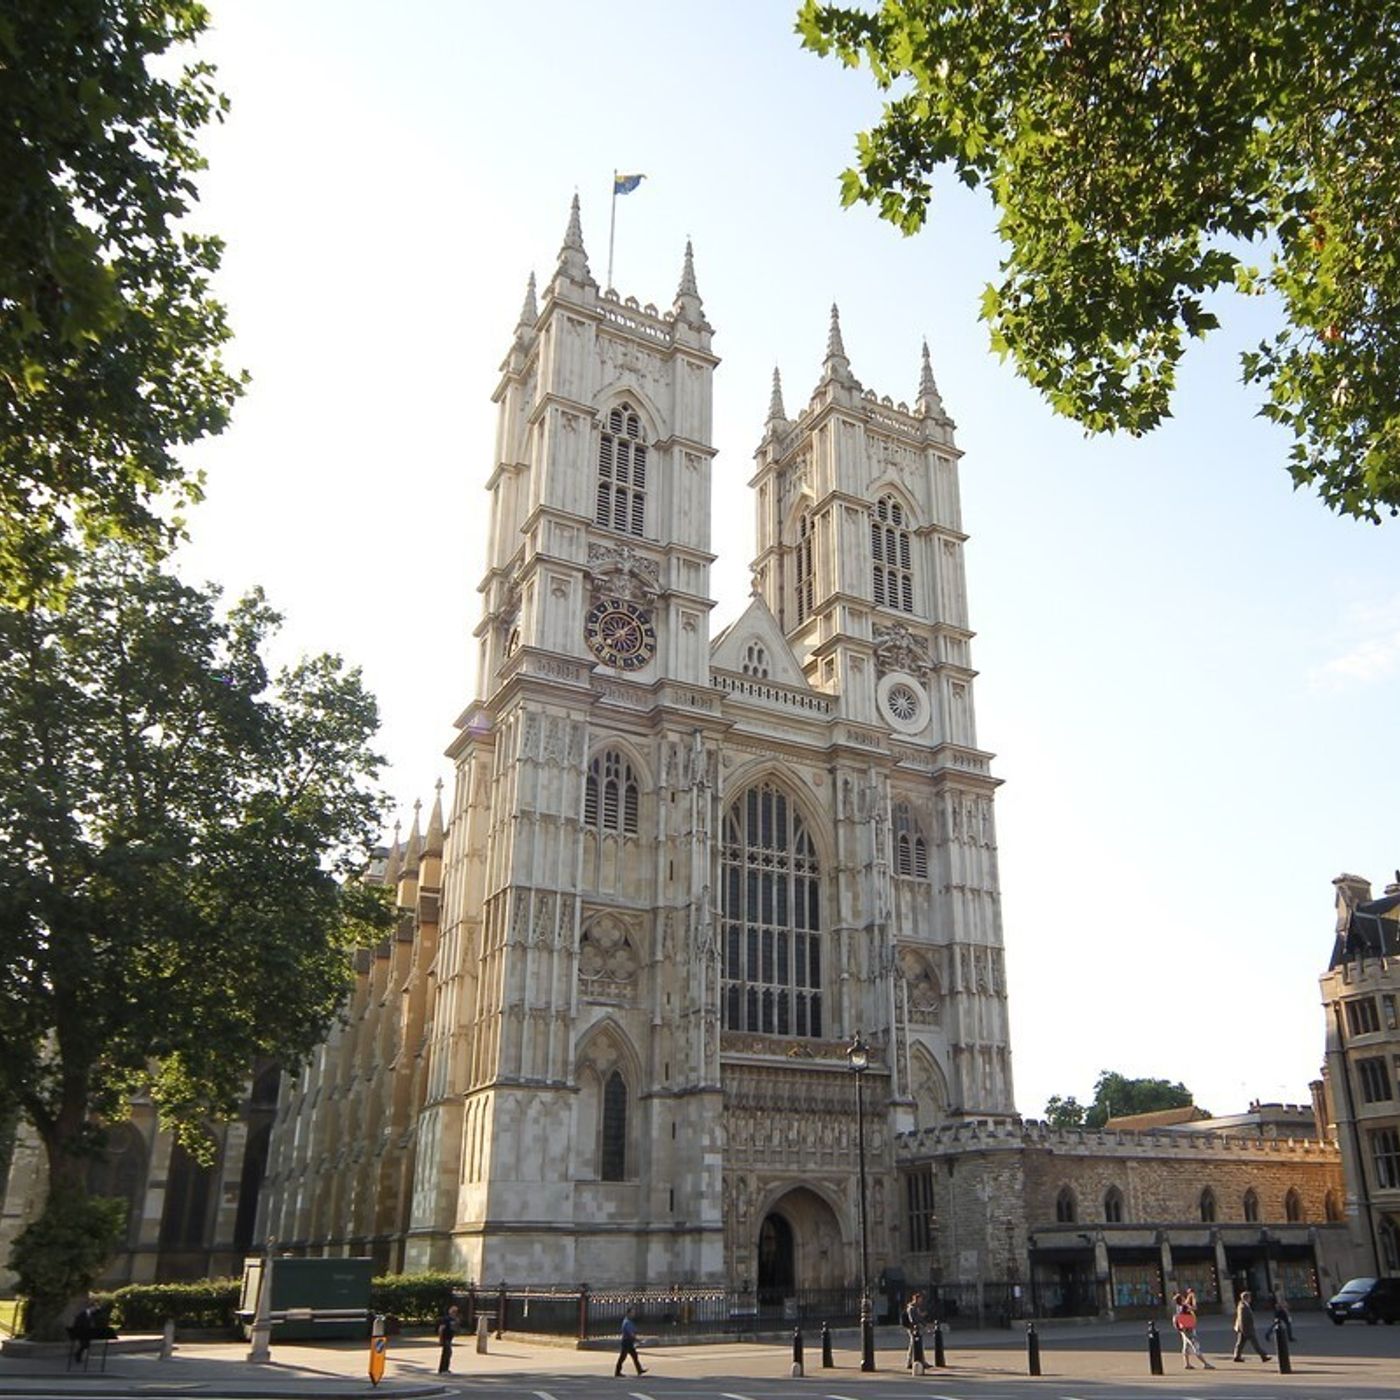 Sung Eucharist for The Feast of the Dedication of Westminster Abbey - Sermon